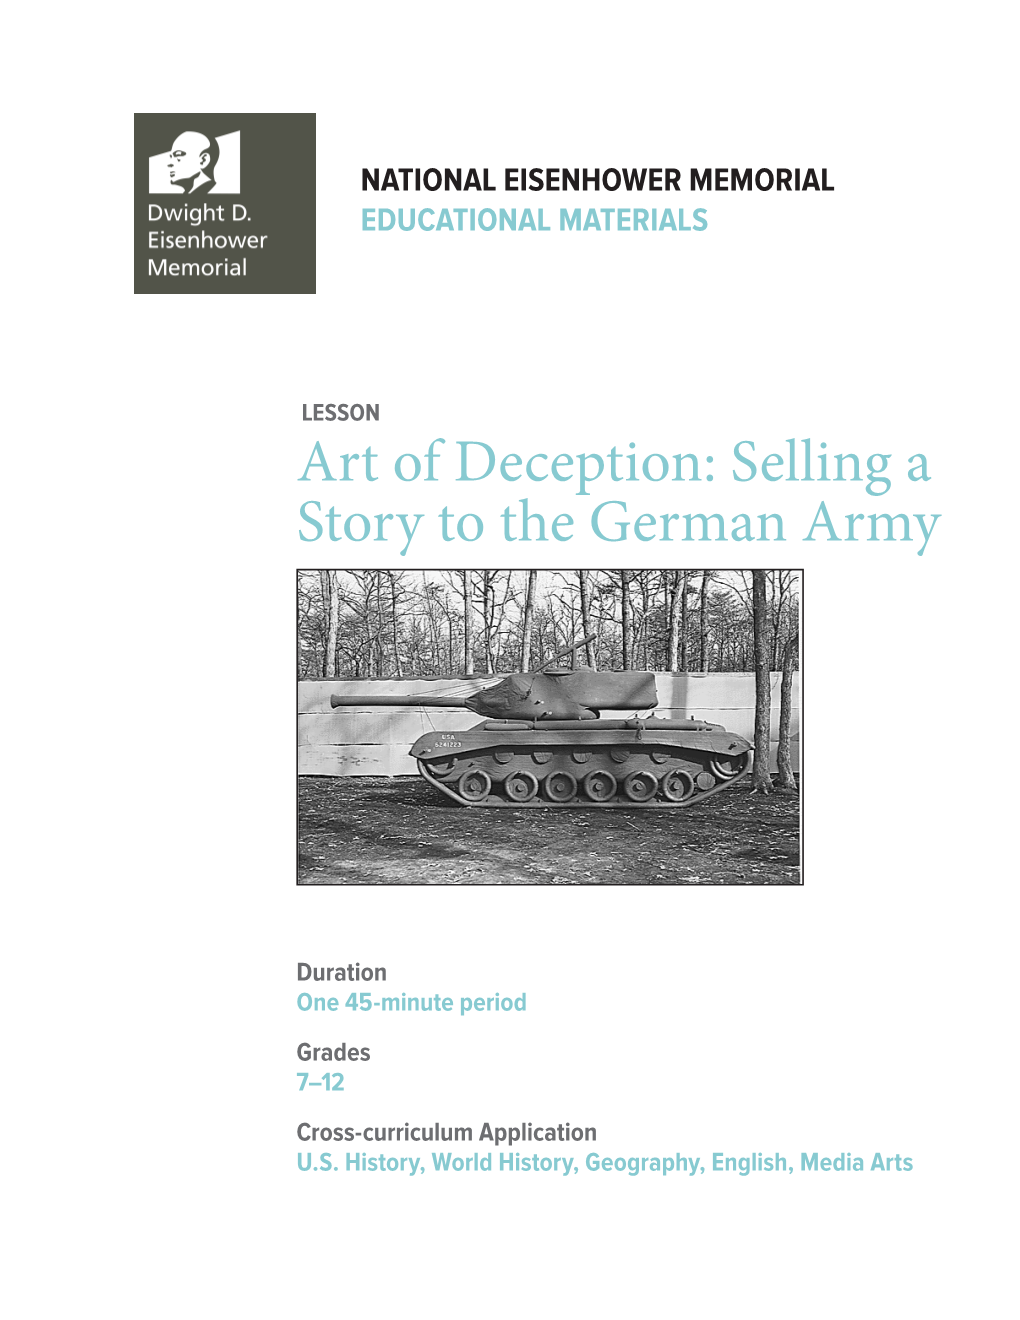 Art of Deception: Selling a Story to the German Army